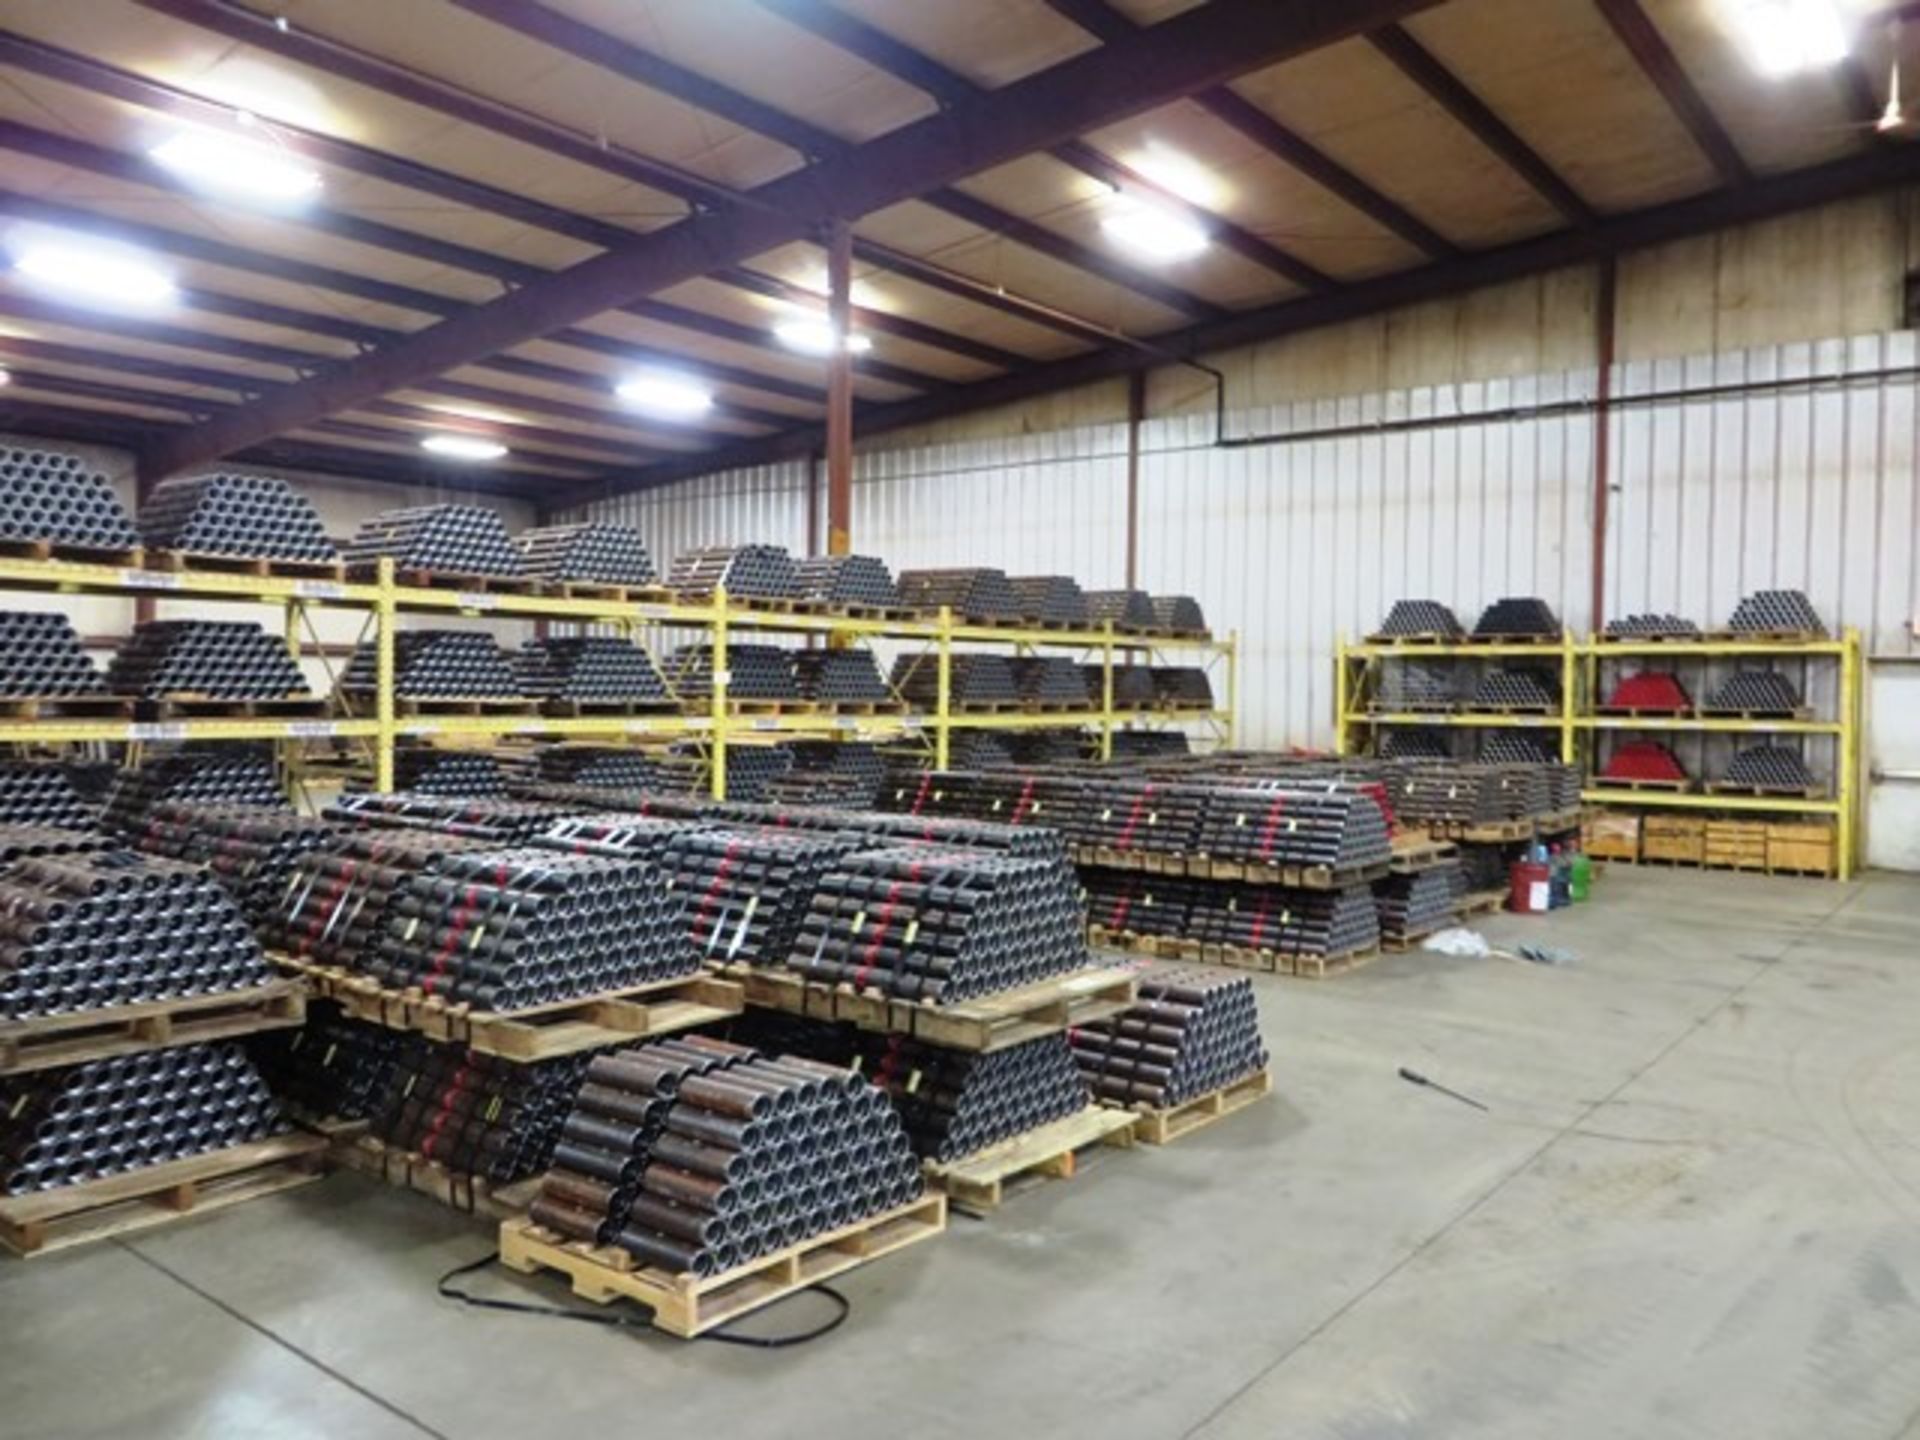 7 Sections of Pallet Racking (no contents)